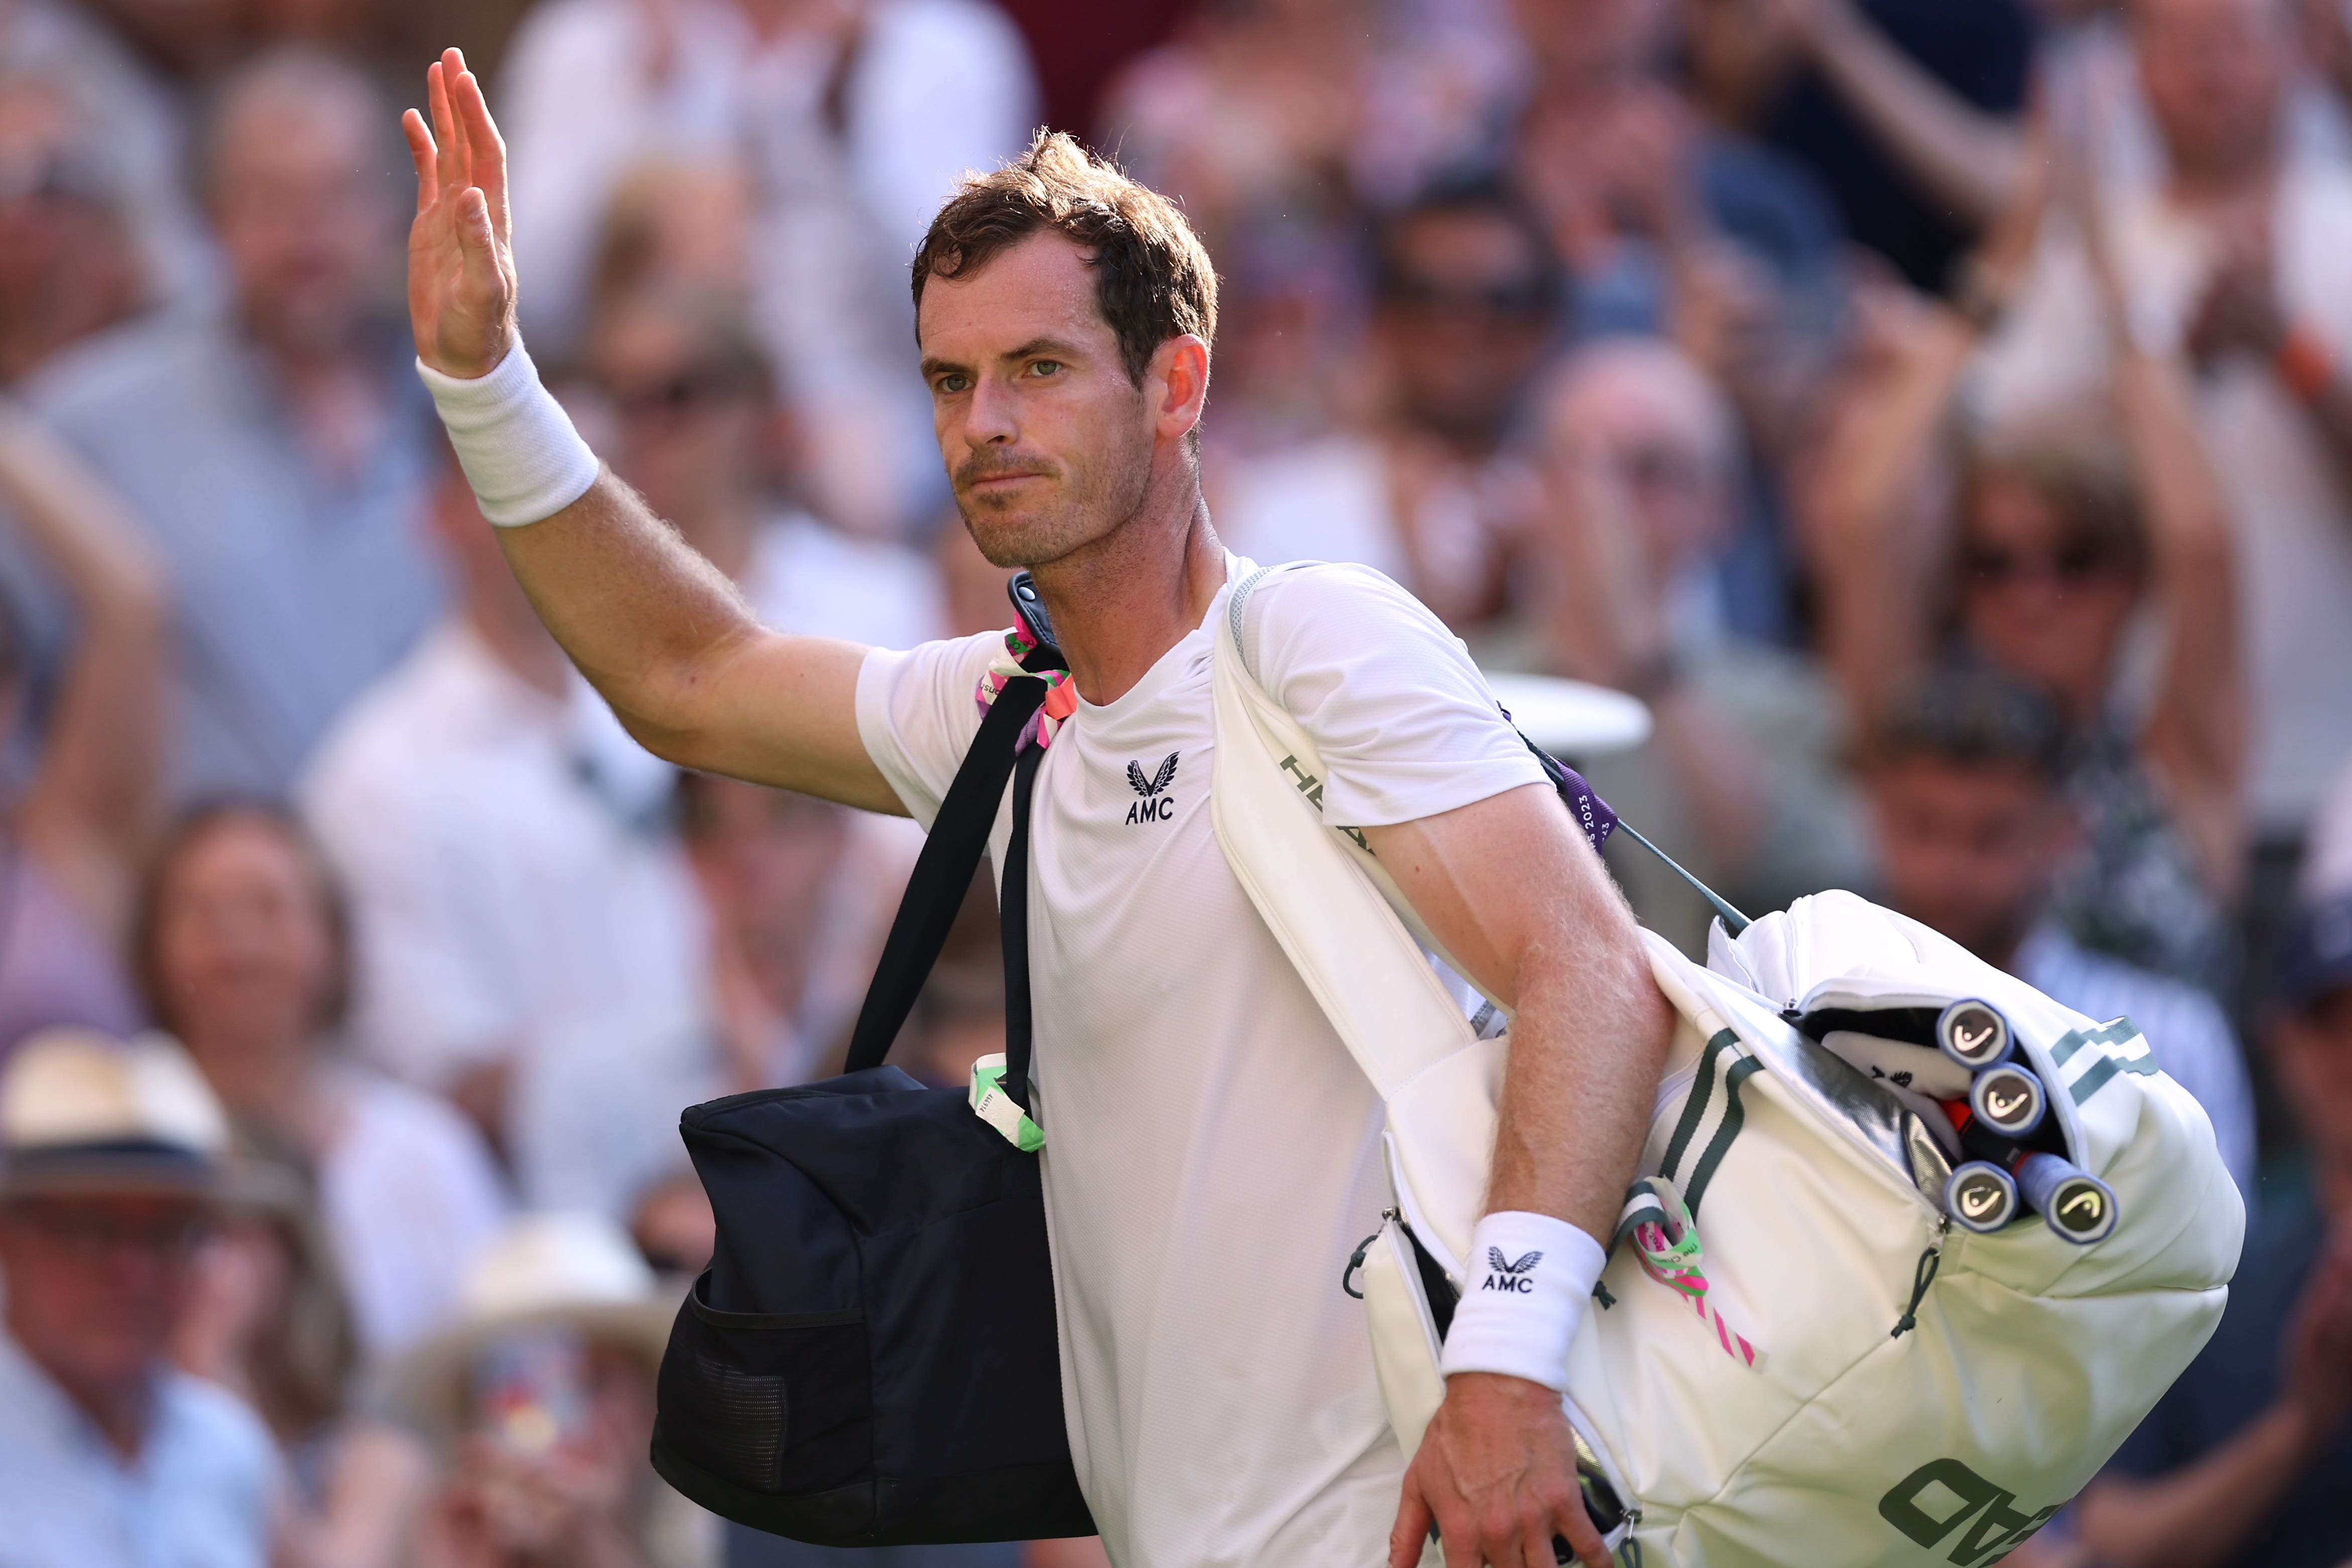 andy murray, wimbledon, andy murray withdraws from wimbledon singles following back operation